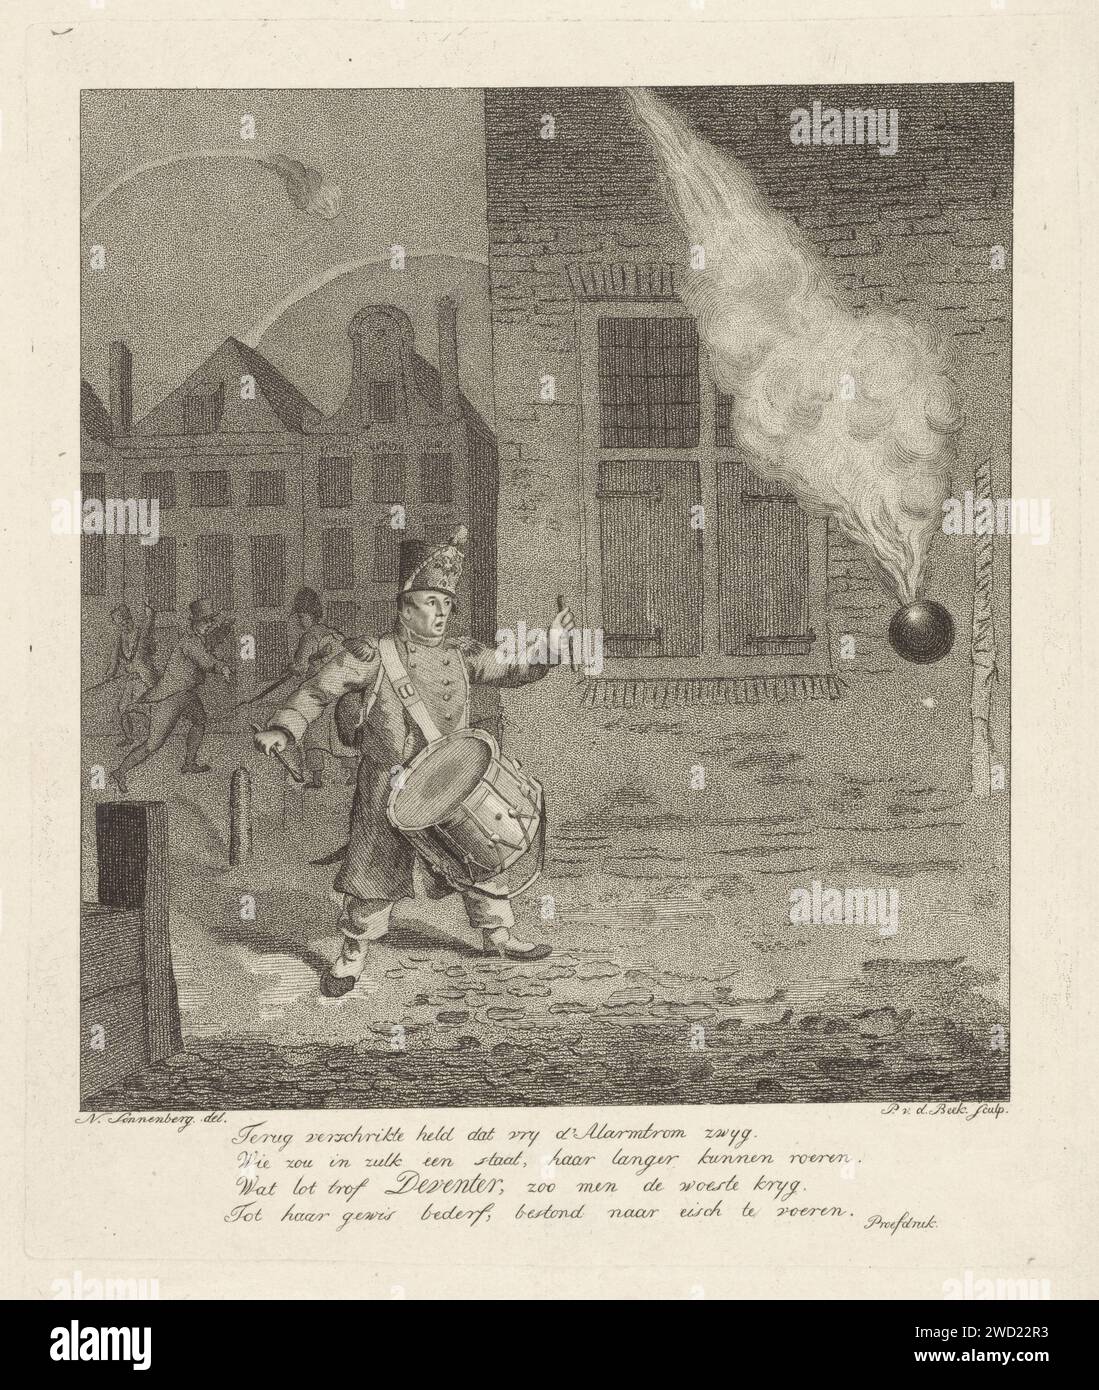 Soldier with drum is shocked by cannonball during siege of Deventer by the French in 1813, Pieter van der Beek, after Nicolaas Sonnenberg, 1813 - 1821 print Soldier walks through streets of Deventer at night and hits drums to alert residents for the attack by Fransen during siege of Deventer in 1813. A cannonball flies over the Brink. Under the show is a verse in four lines about the startled soldier.  paper etching French period Brink Stock Photo